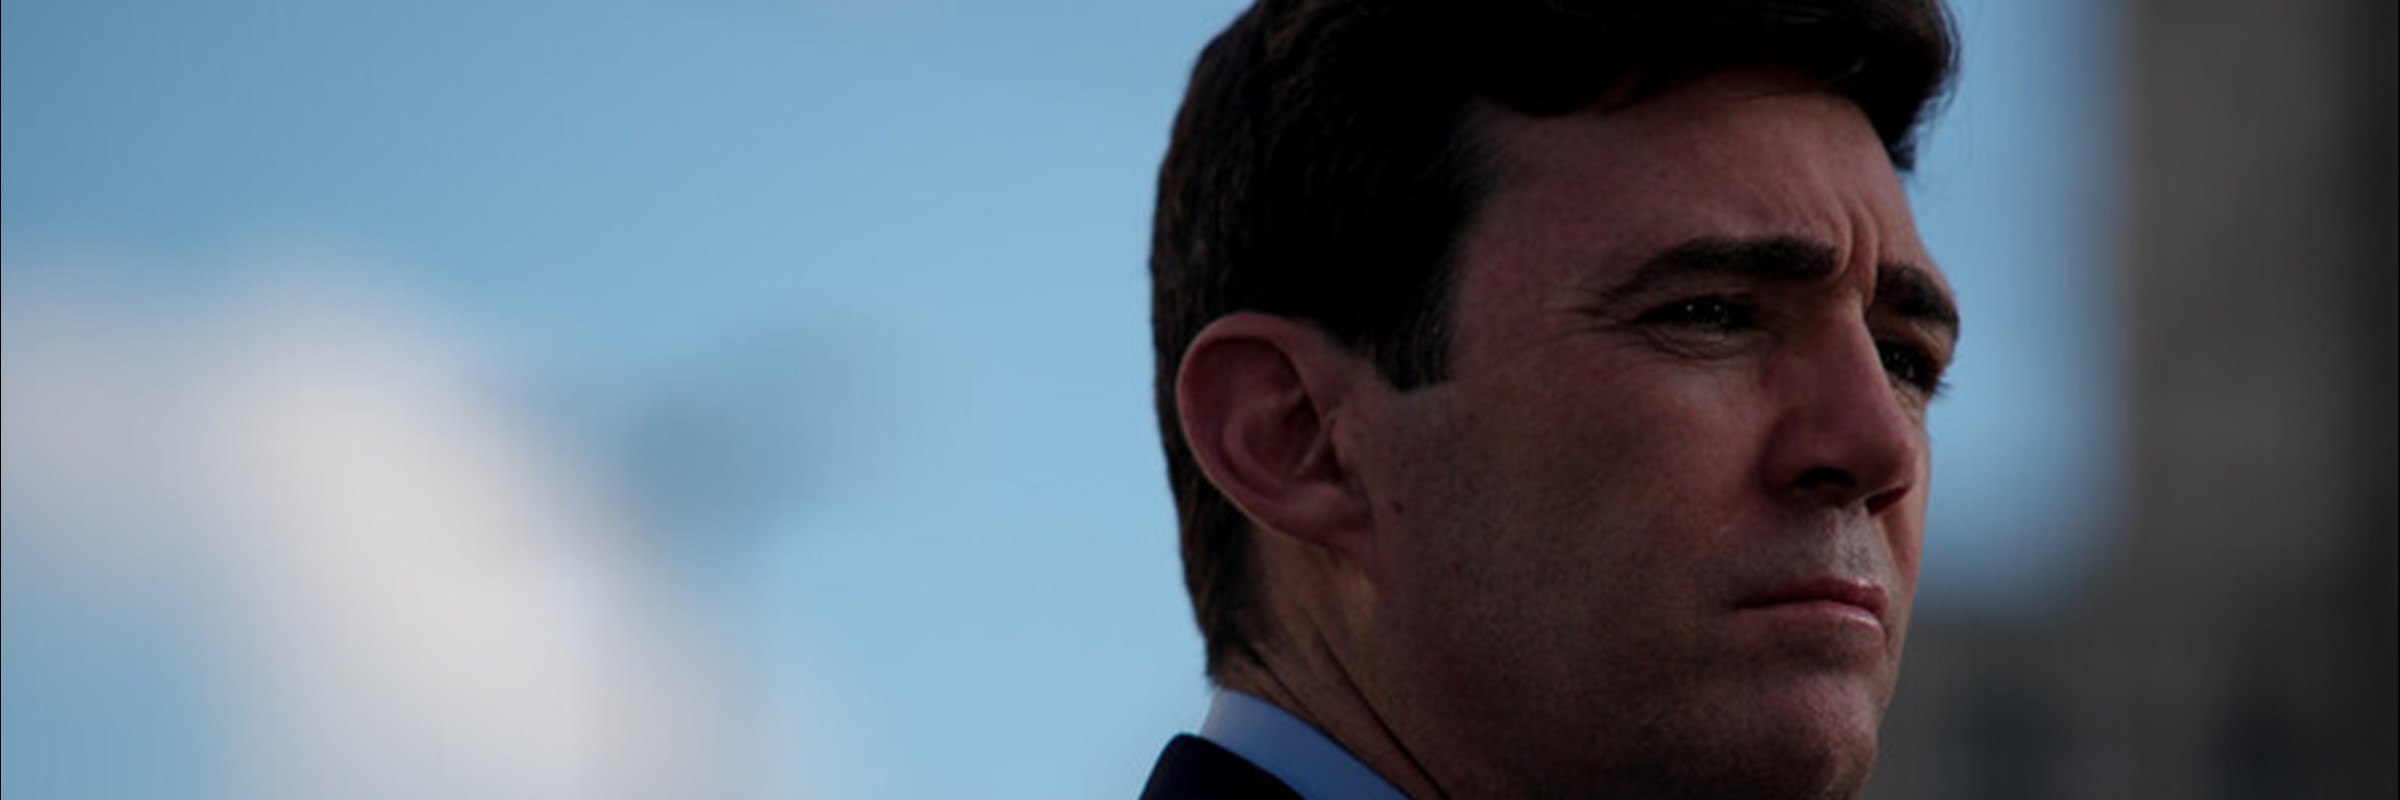 A headshot of the Mayor of Greater Manchester, Andy Burnham